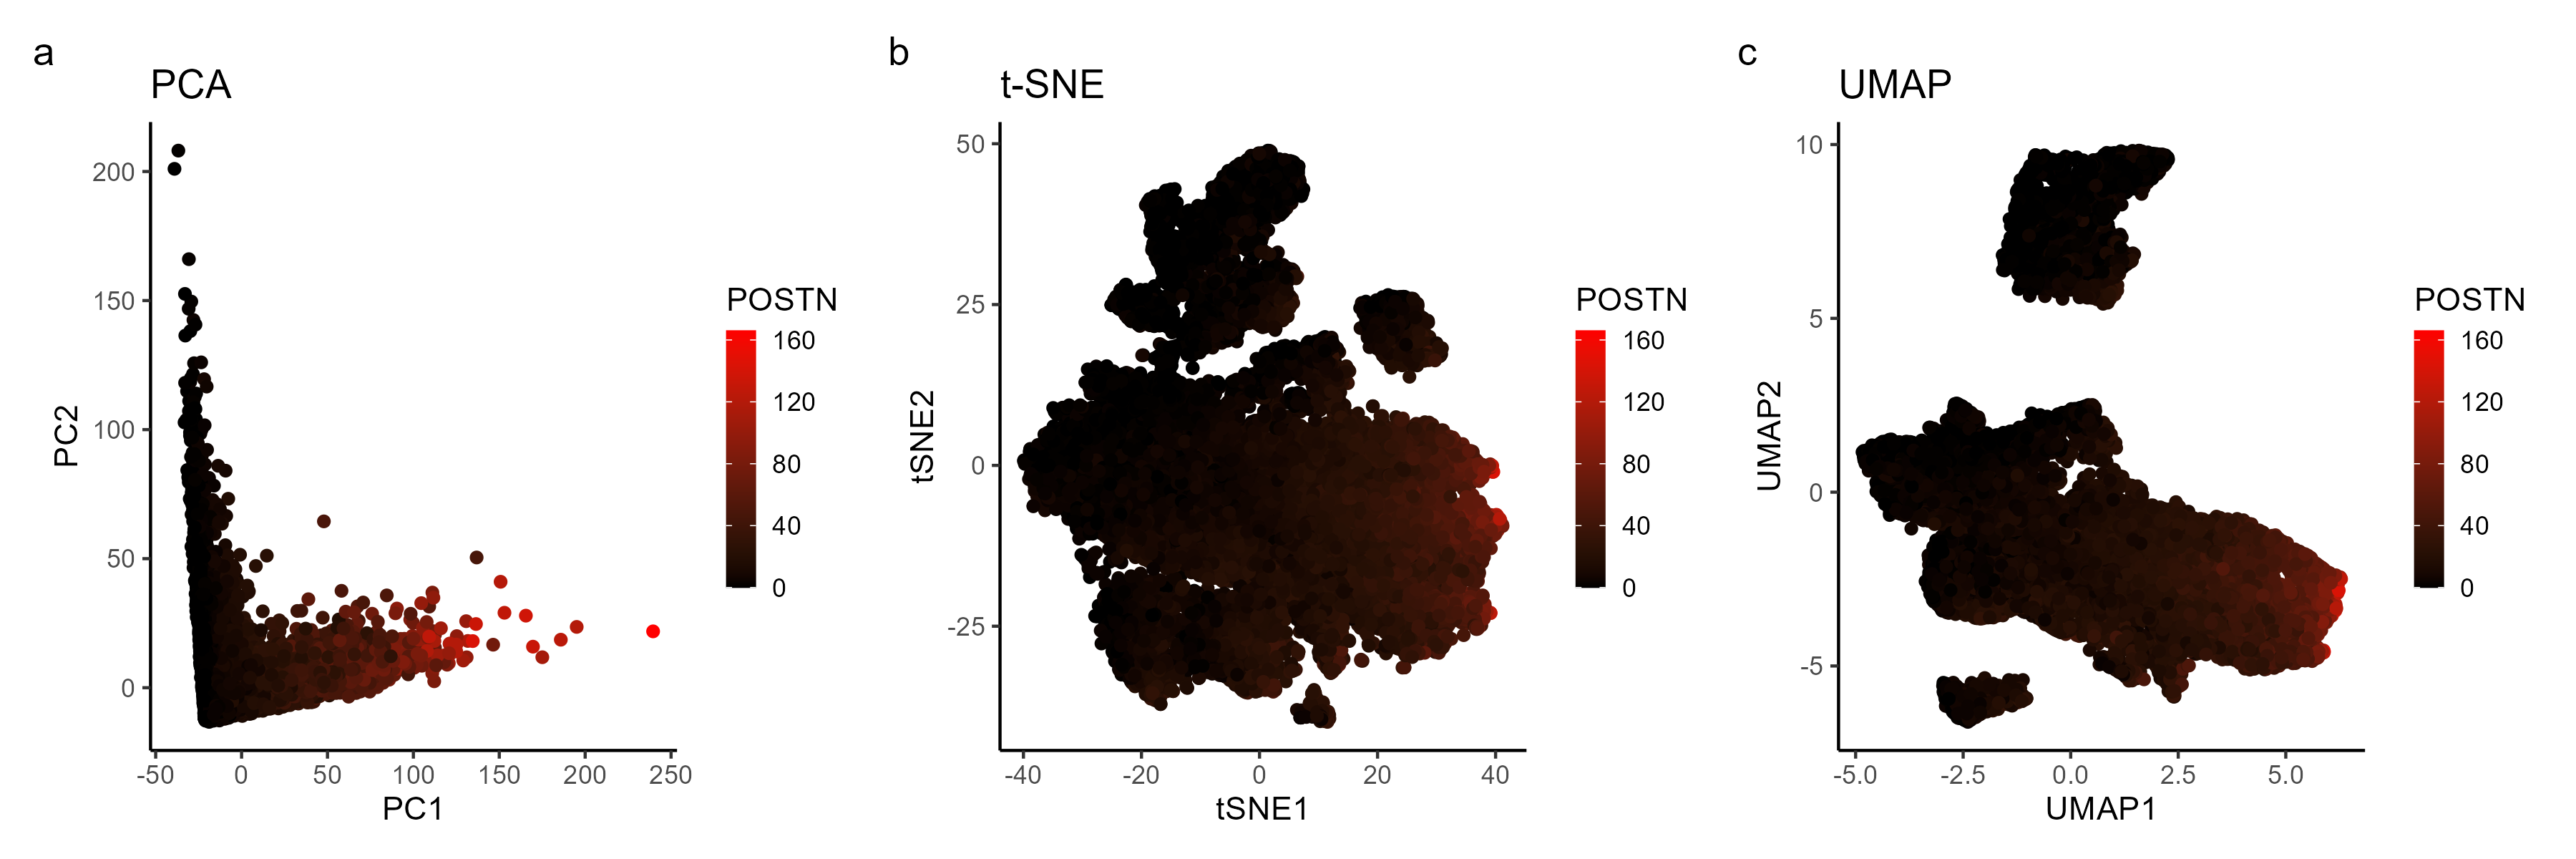 Analysis of most expressed gene (POSTN): PCA, t-SNE, and UMAP Plots